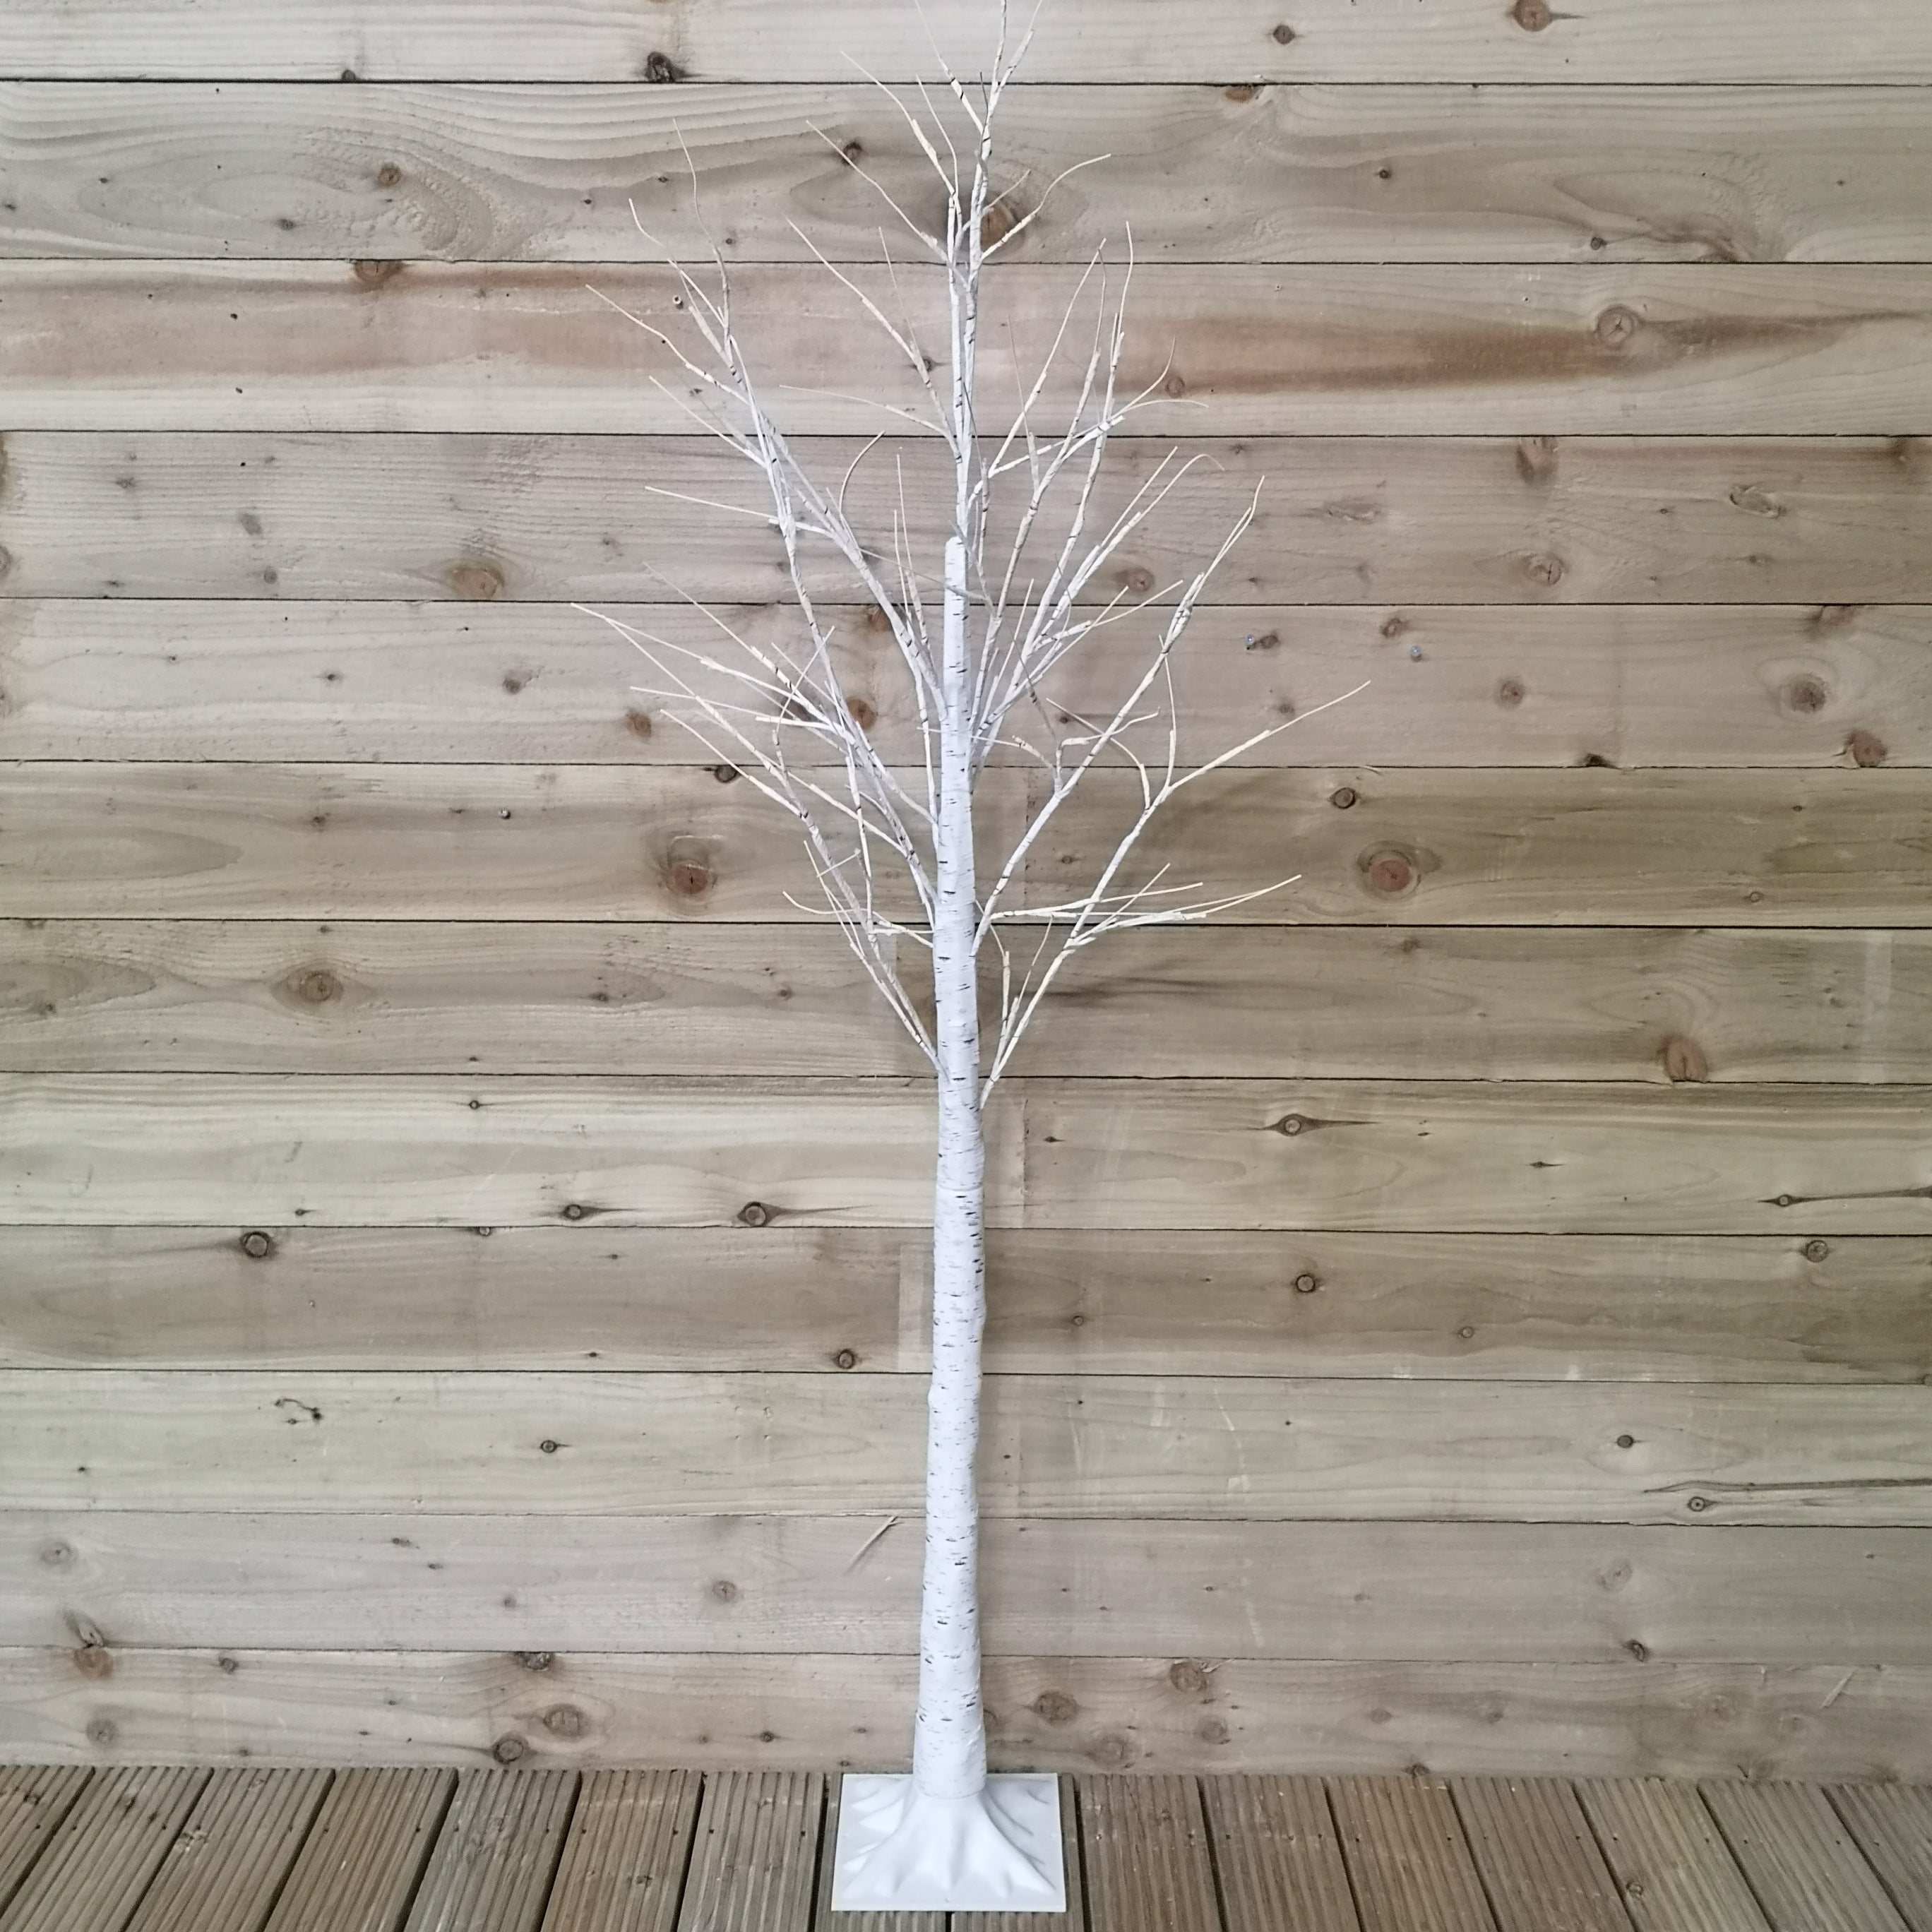 1.8m (6ft) Indoor Outdoor Christmas Lit Birch Tree with 80 Ice White LEDs